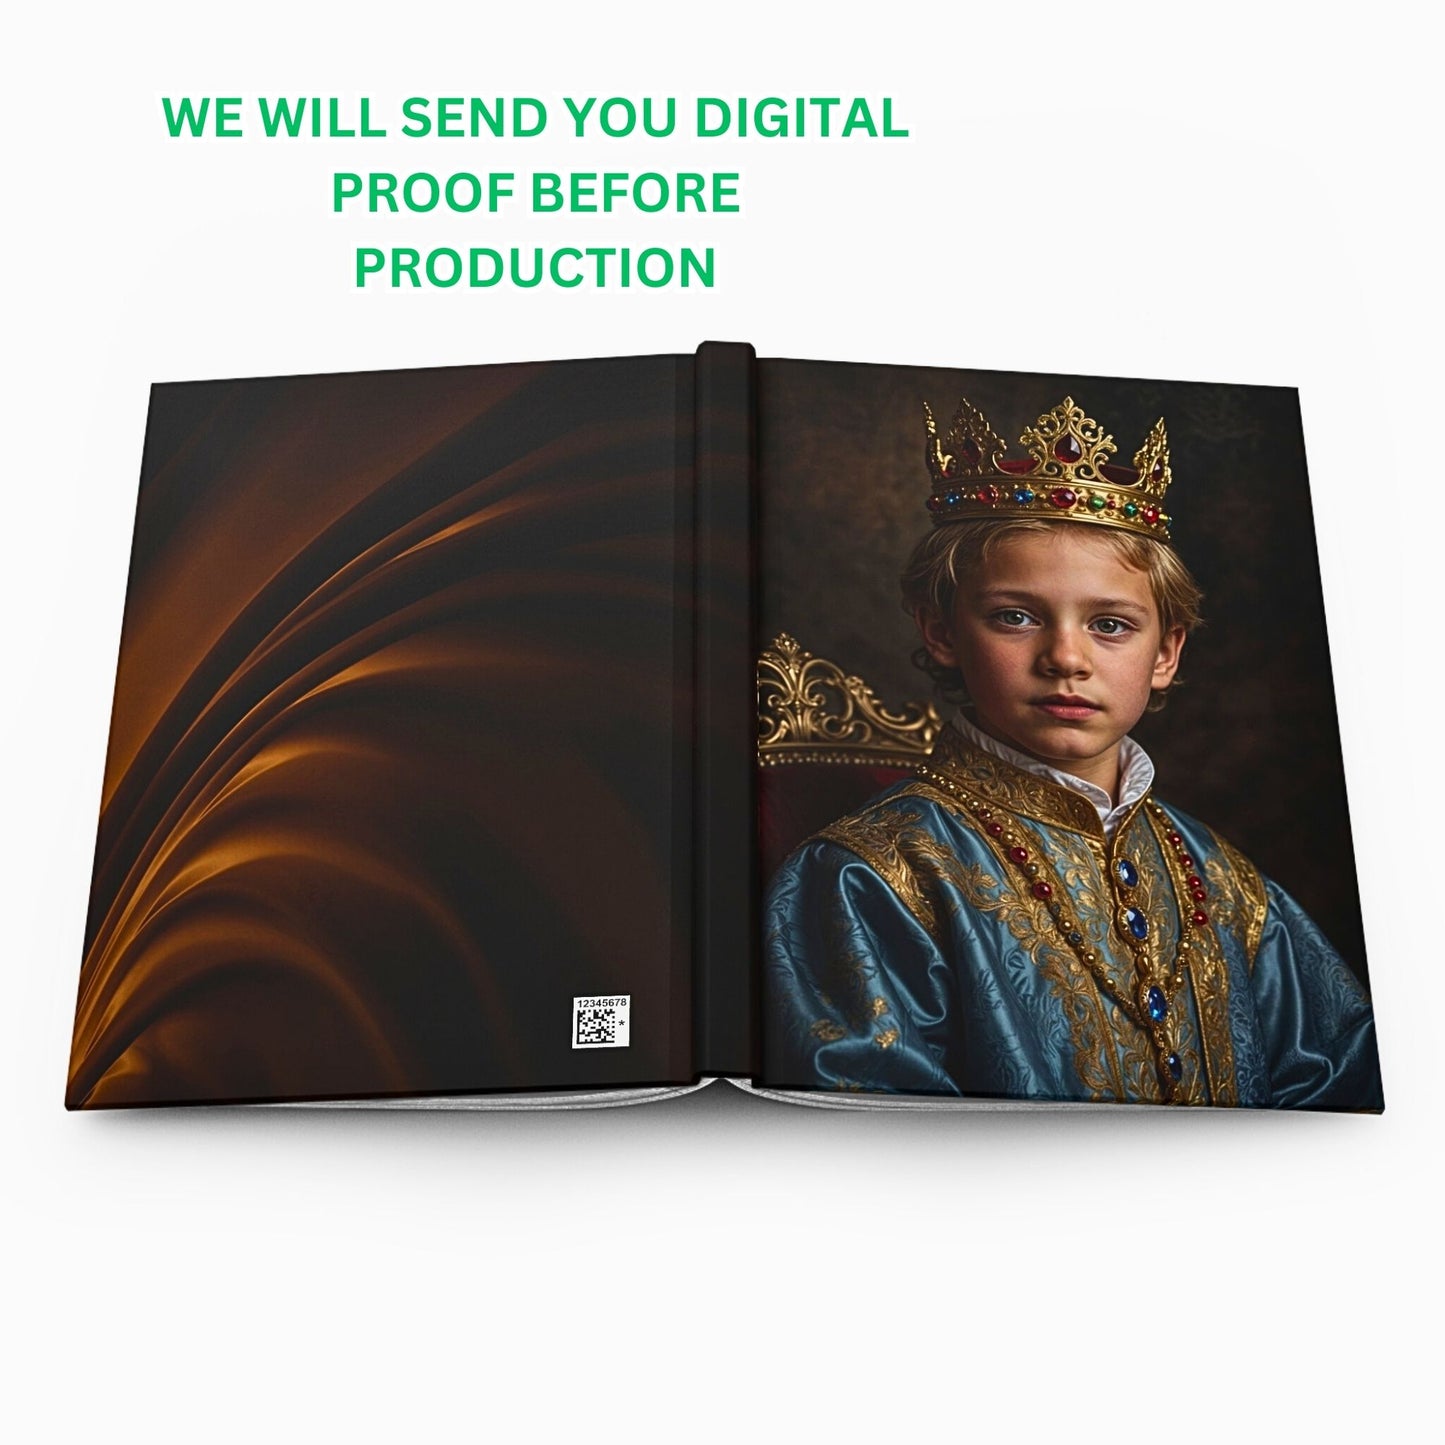 Elevate your child’s photo to a work of art with our exclusive Custom Kids Royal Journal from Photo. This meticulously crafted journal transforms ordinary images into a bespoke masterpiece reminiscent of Renaissance-era portraiture.